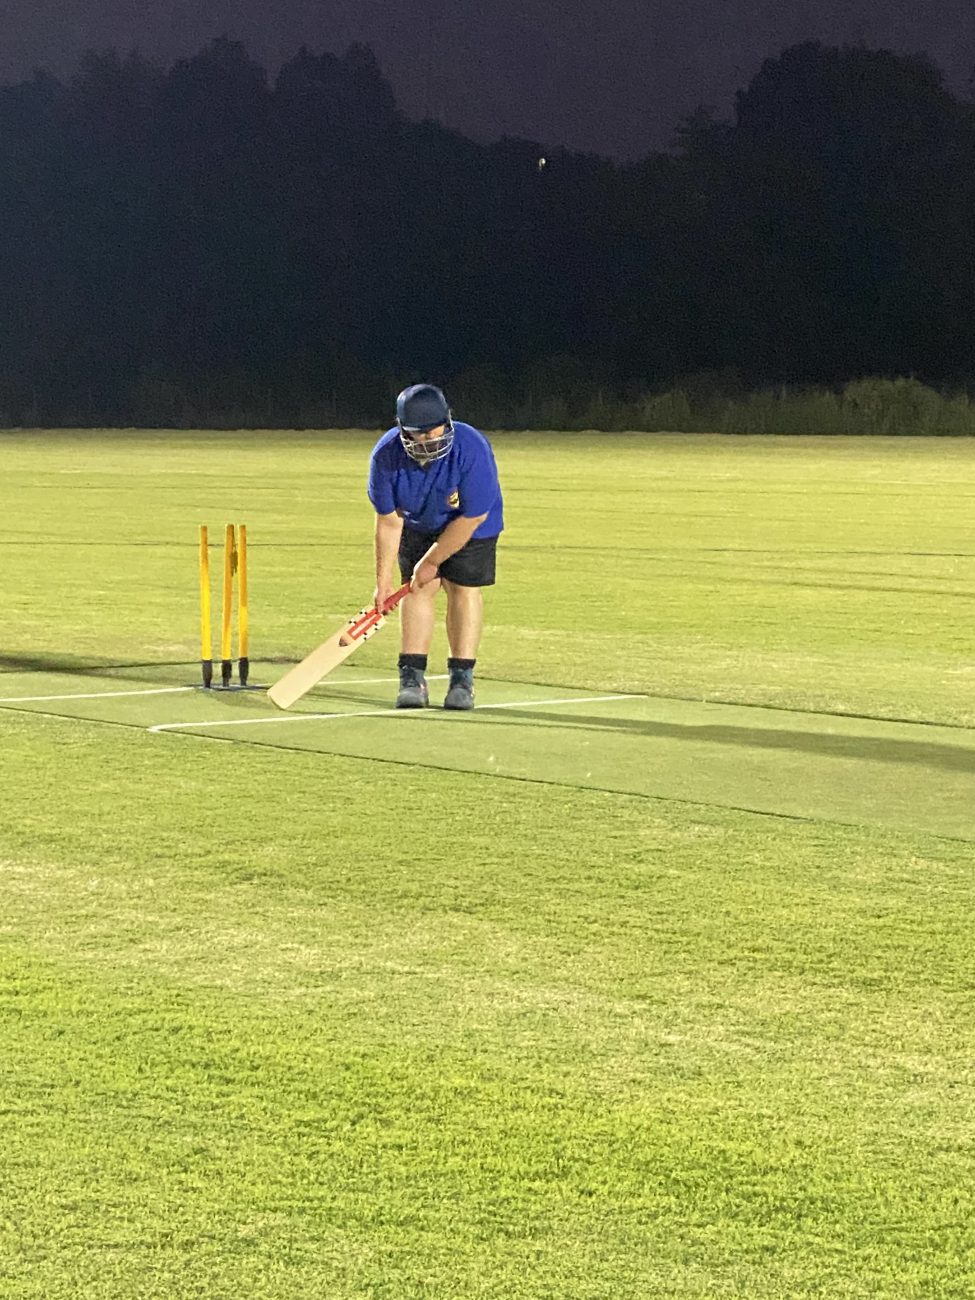 Blue Dolphin's batsman Brendon, listens closely to the beeing ball in readiness to hit through the fielders to the boundary.